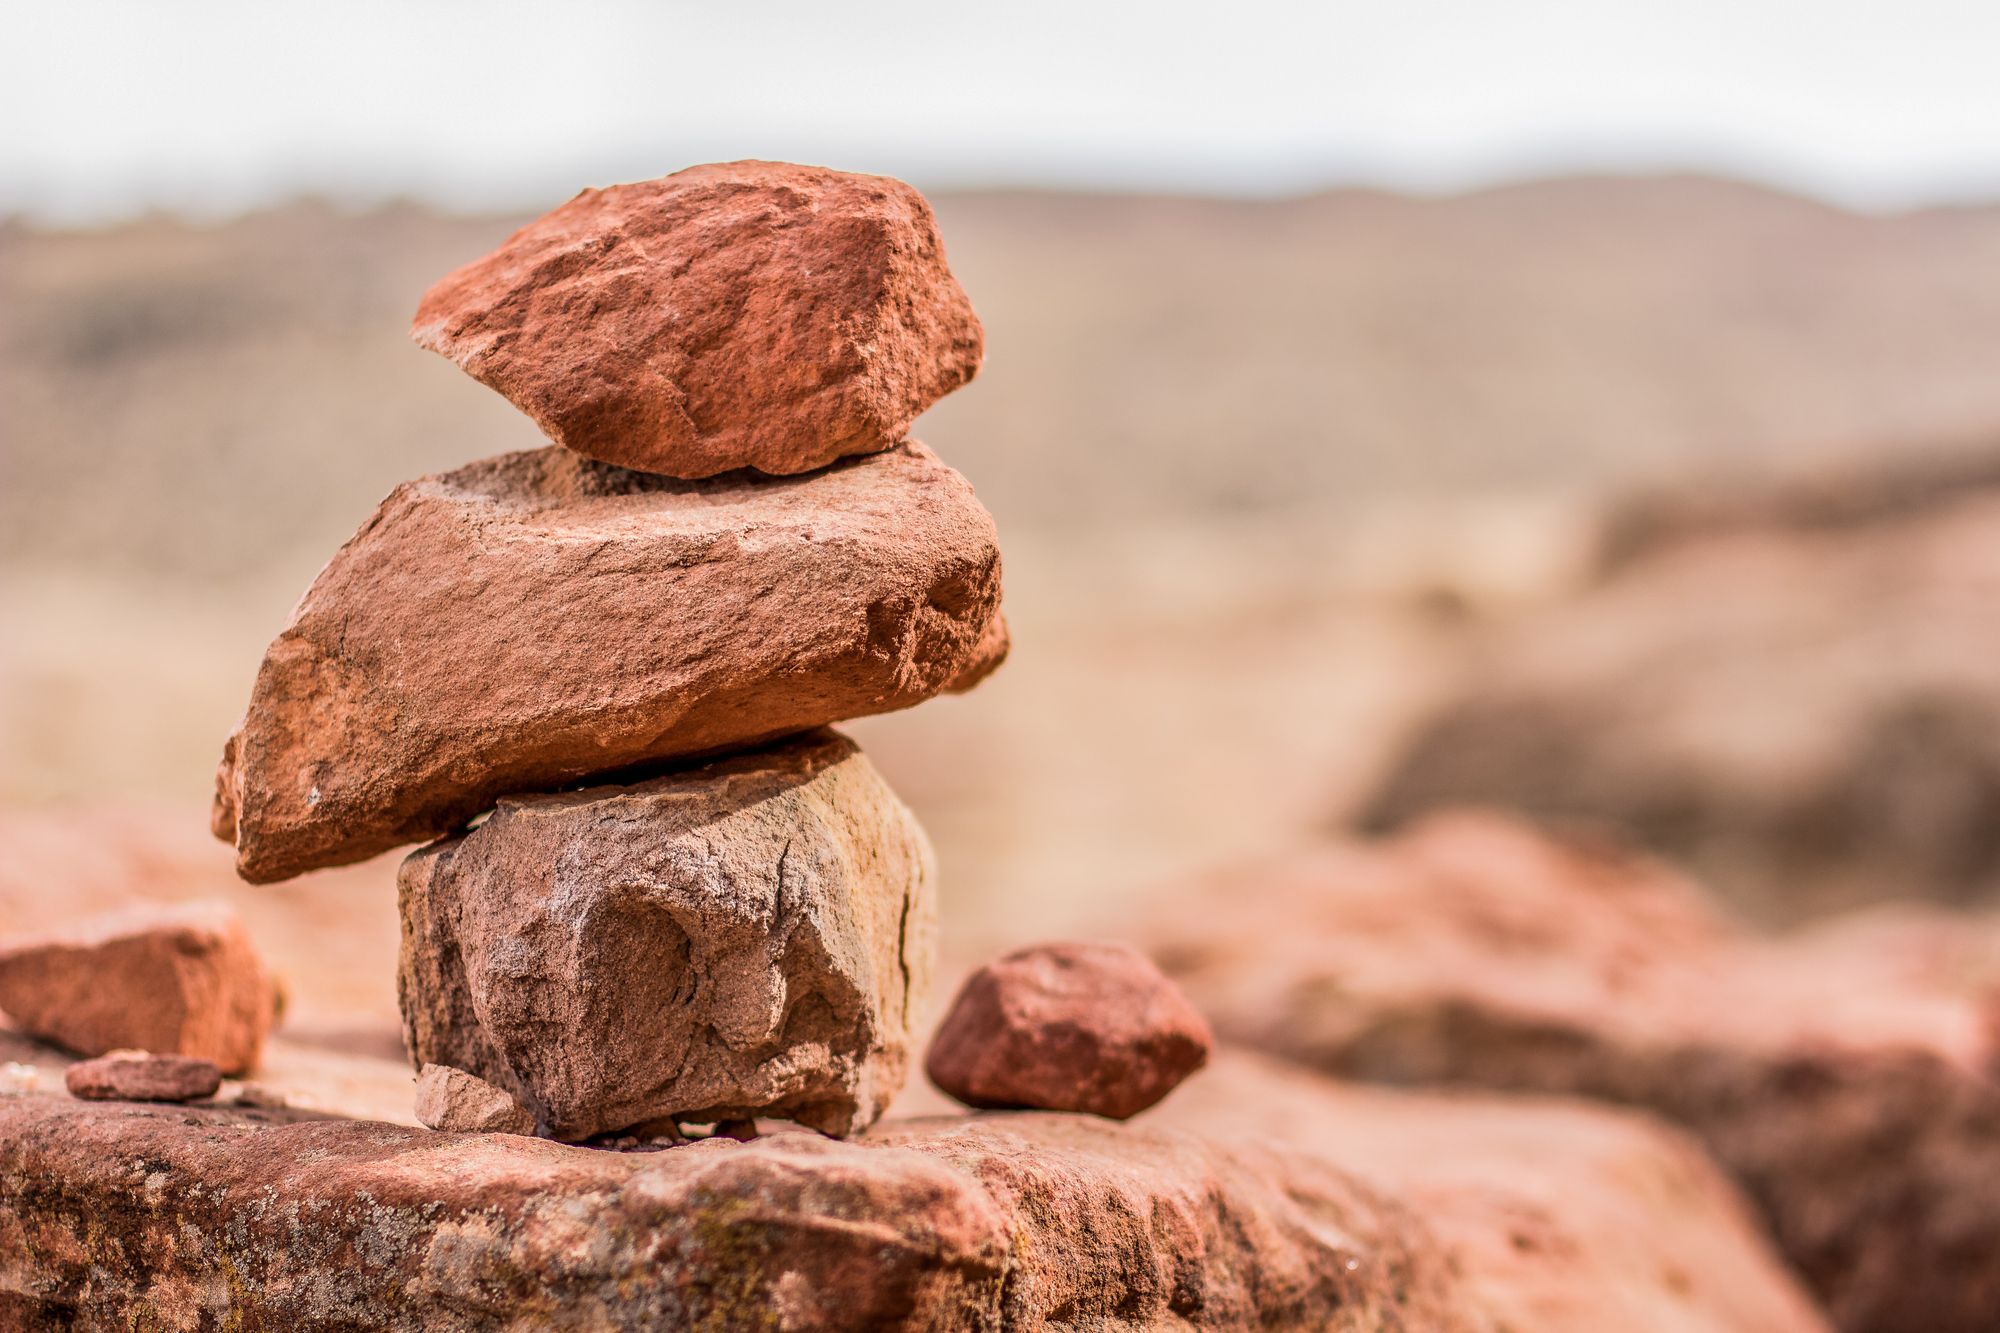 A picture of three rocks, stacked.